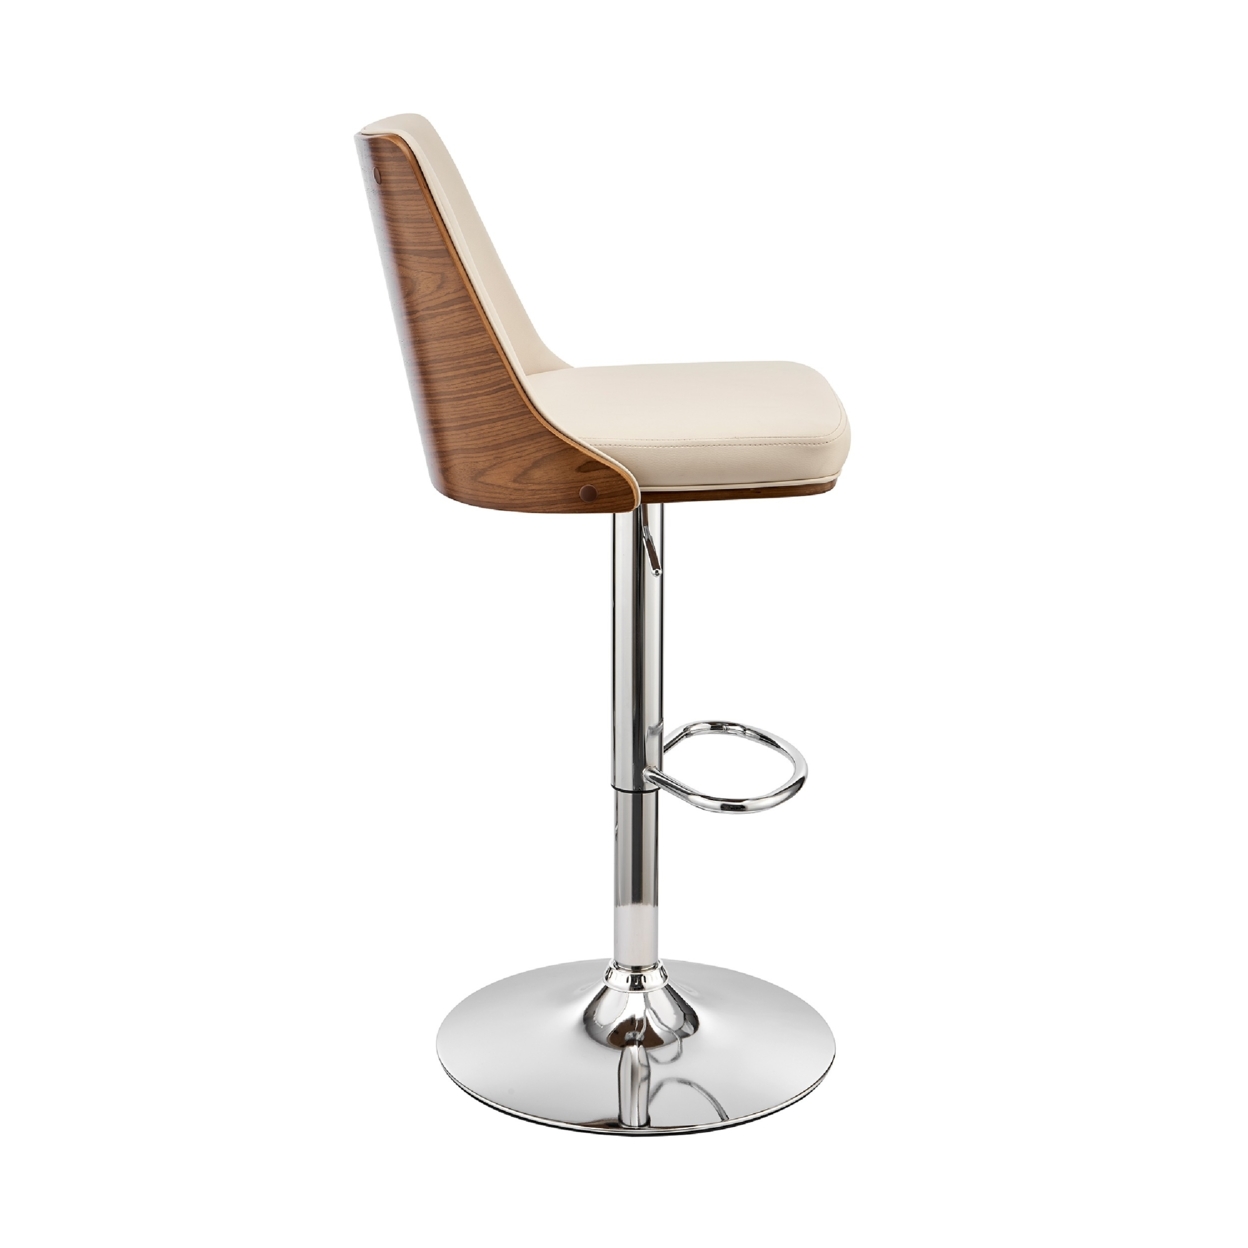 Adjustable Barstool With Faux Leather And Wooden Backing, Cream And Brown- Saltoro Sherpi